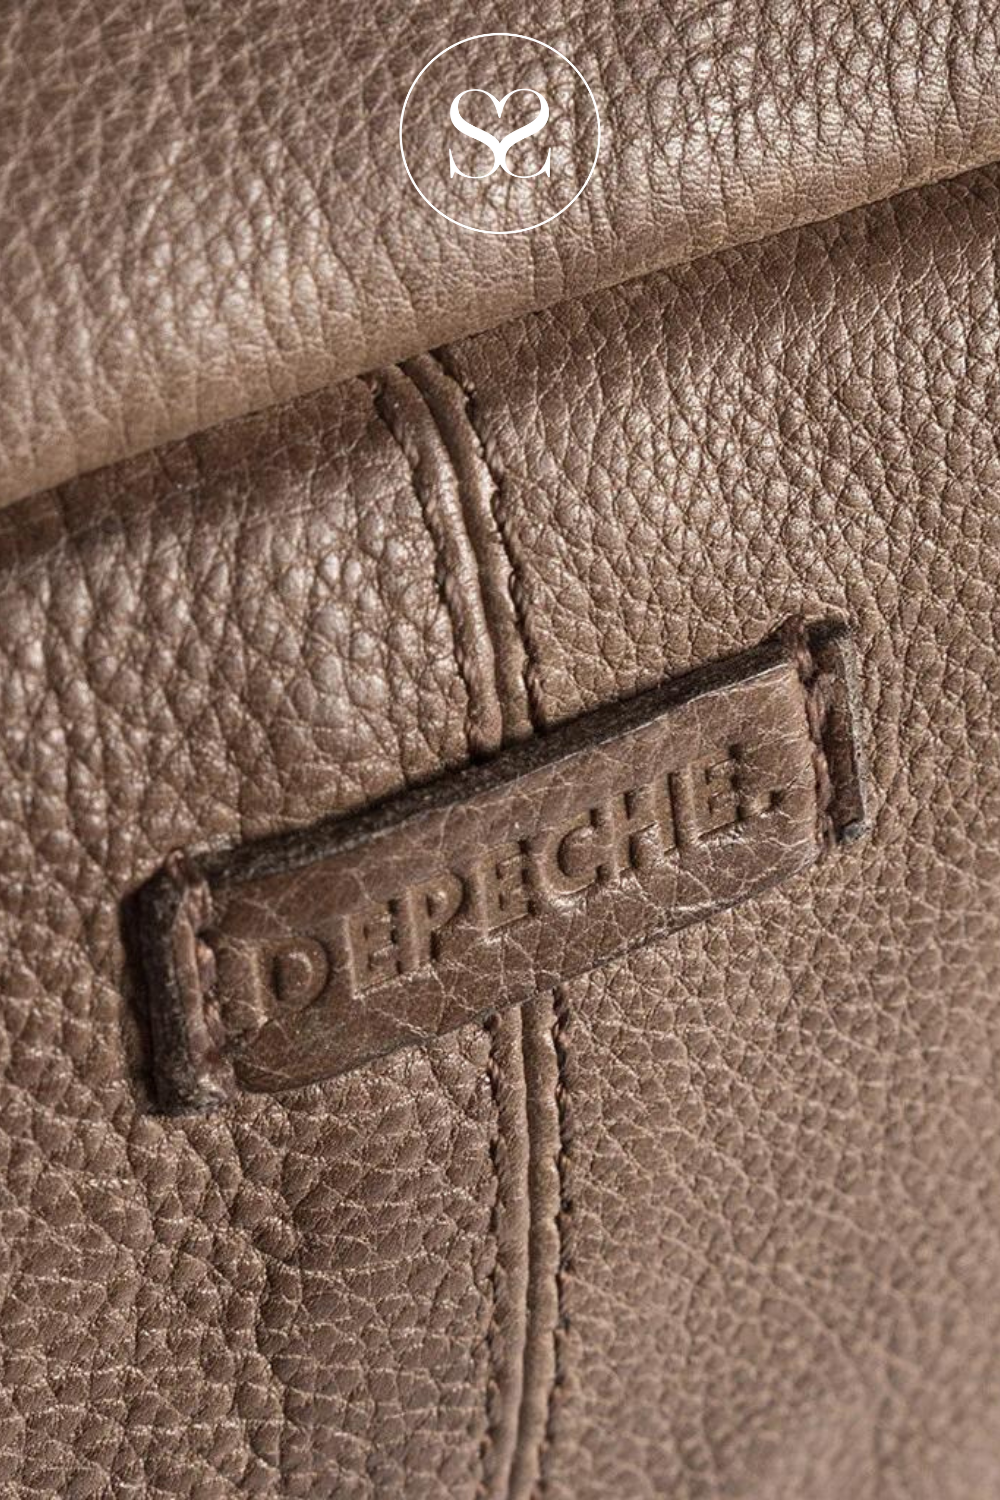 DEPECHE 141432 TAUPE BROWN LEATHER BAG WITH FRONT POCKET AND GOLD HARDWARE.